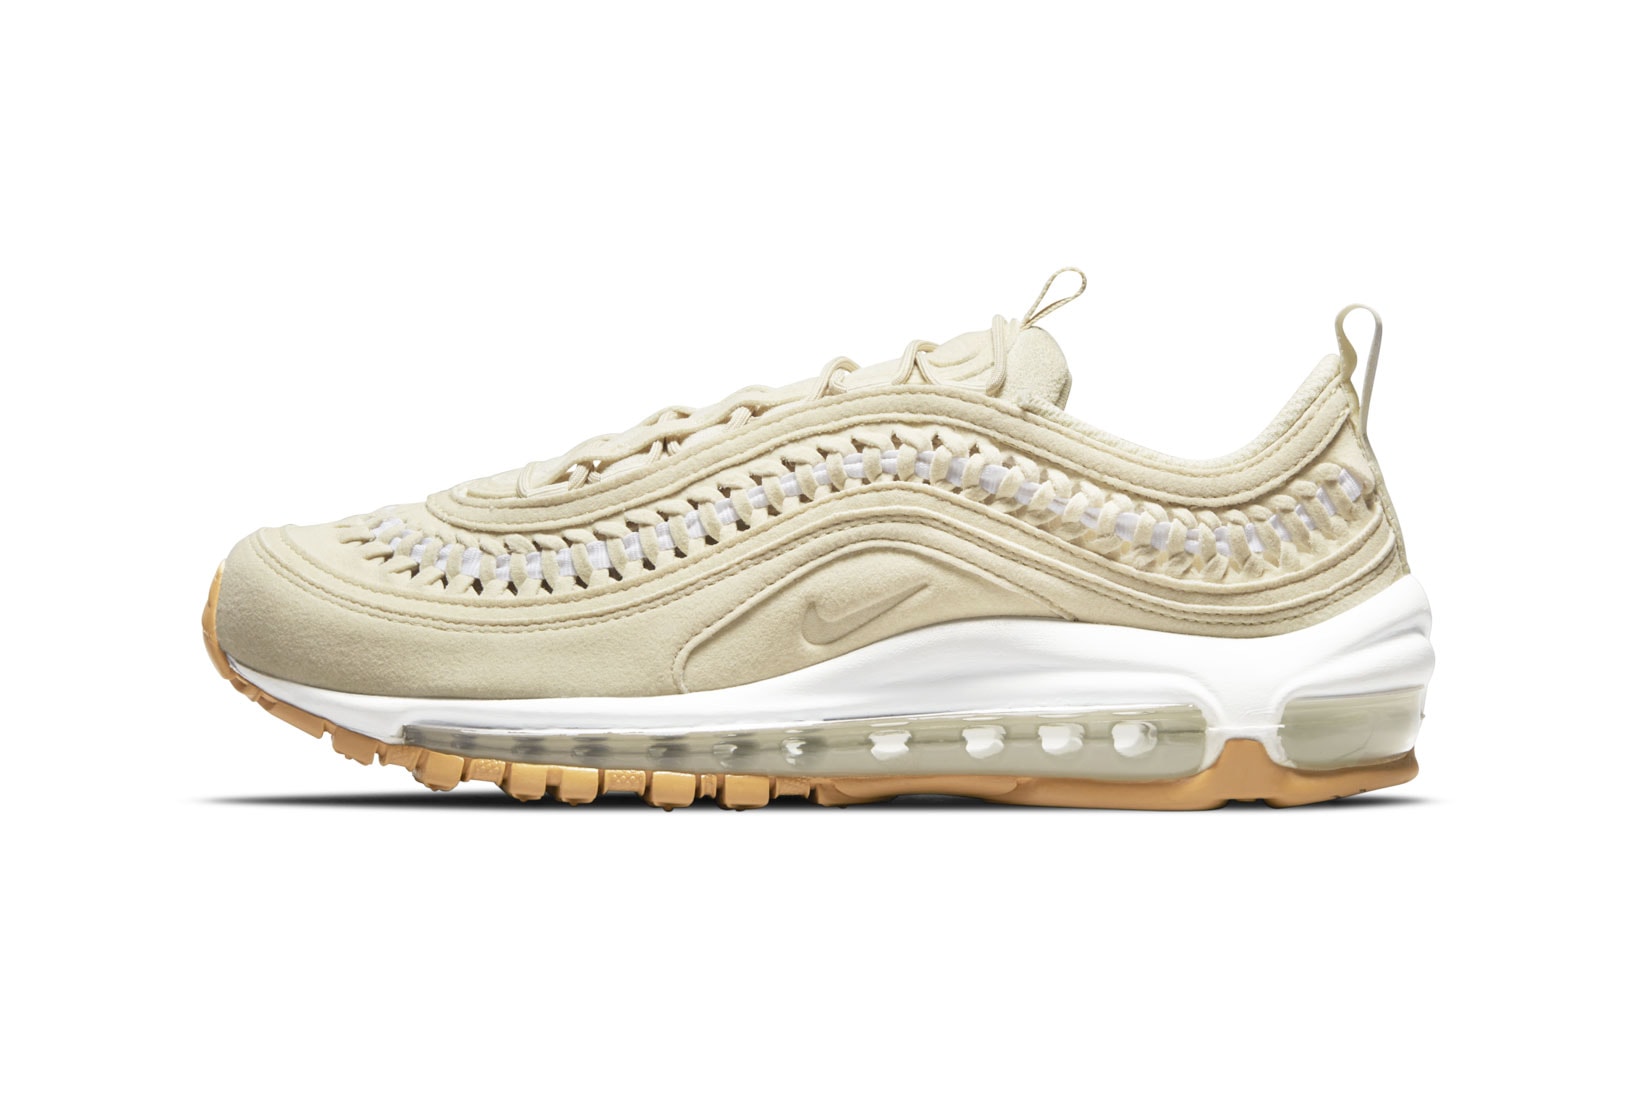 Nike Air Max 97 AM97 LX Woven Sneakers Upper